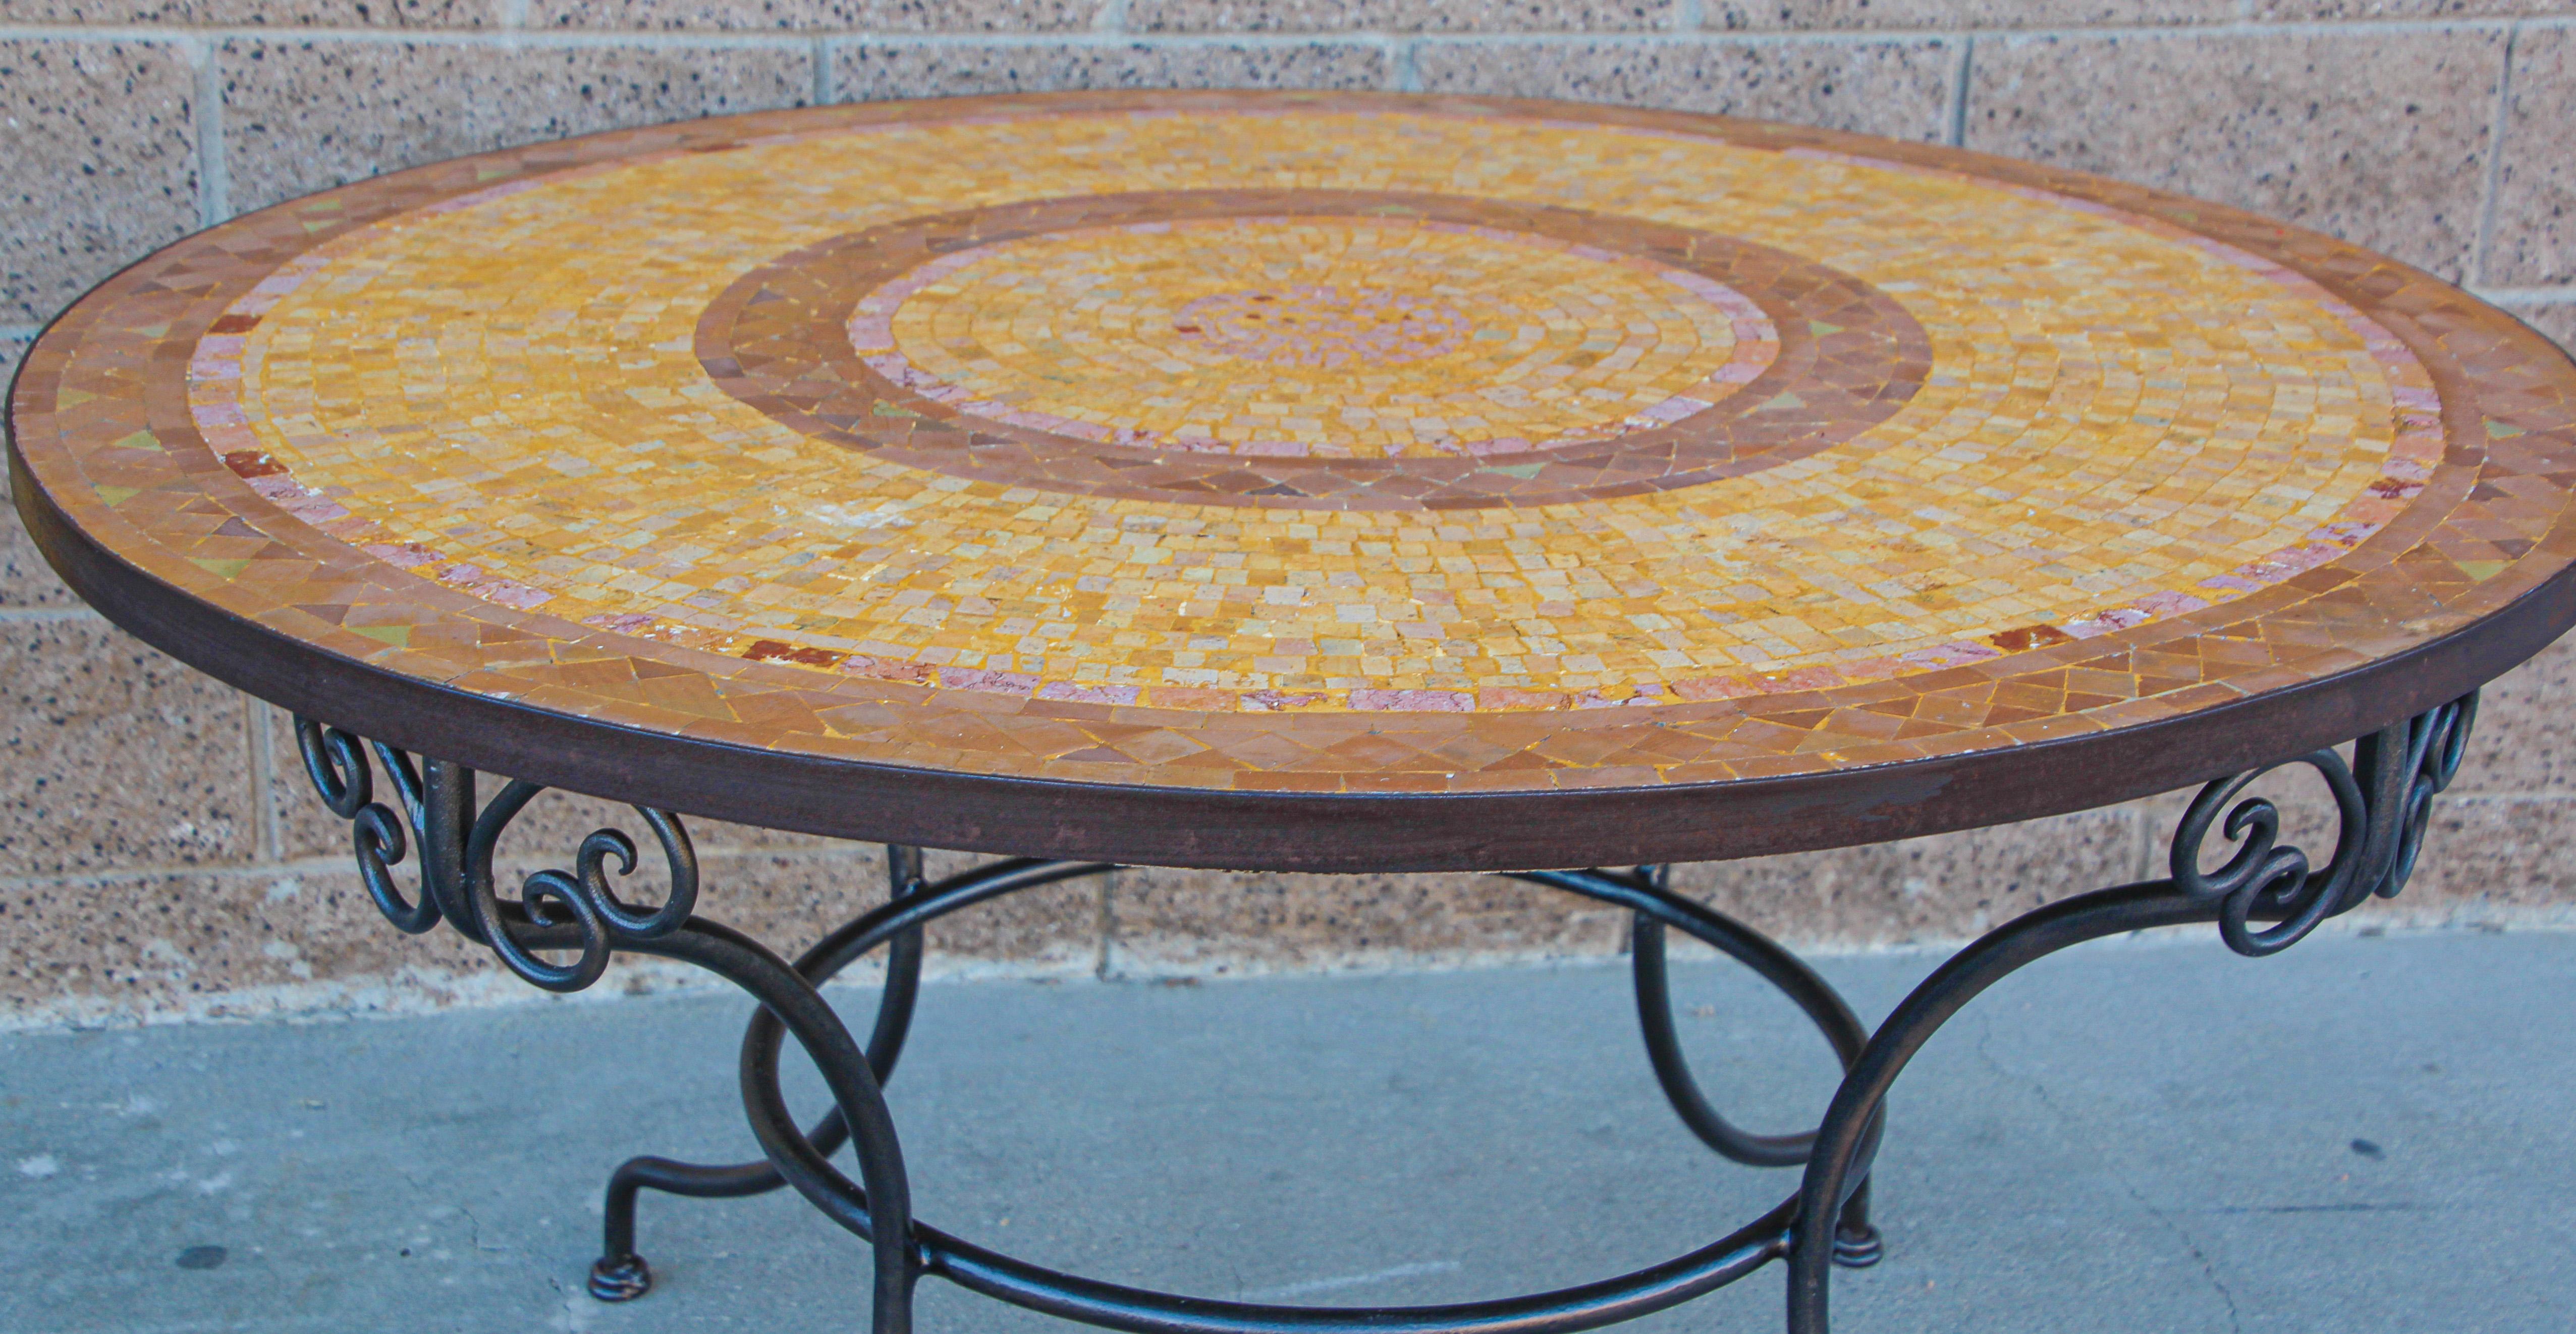 A inlaid round stone Moroccan mosaic tile tabletop on a wrought iron base.
Handcrafted in Morocco could be use indoor or outdoor.
Dimensions: Height: 29.5 in (74.93 cm)Diameter: 47 in (119.38 cm)
Spanish Moorish garden dining mosaic table in the